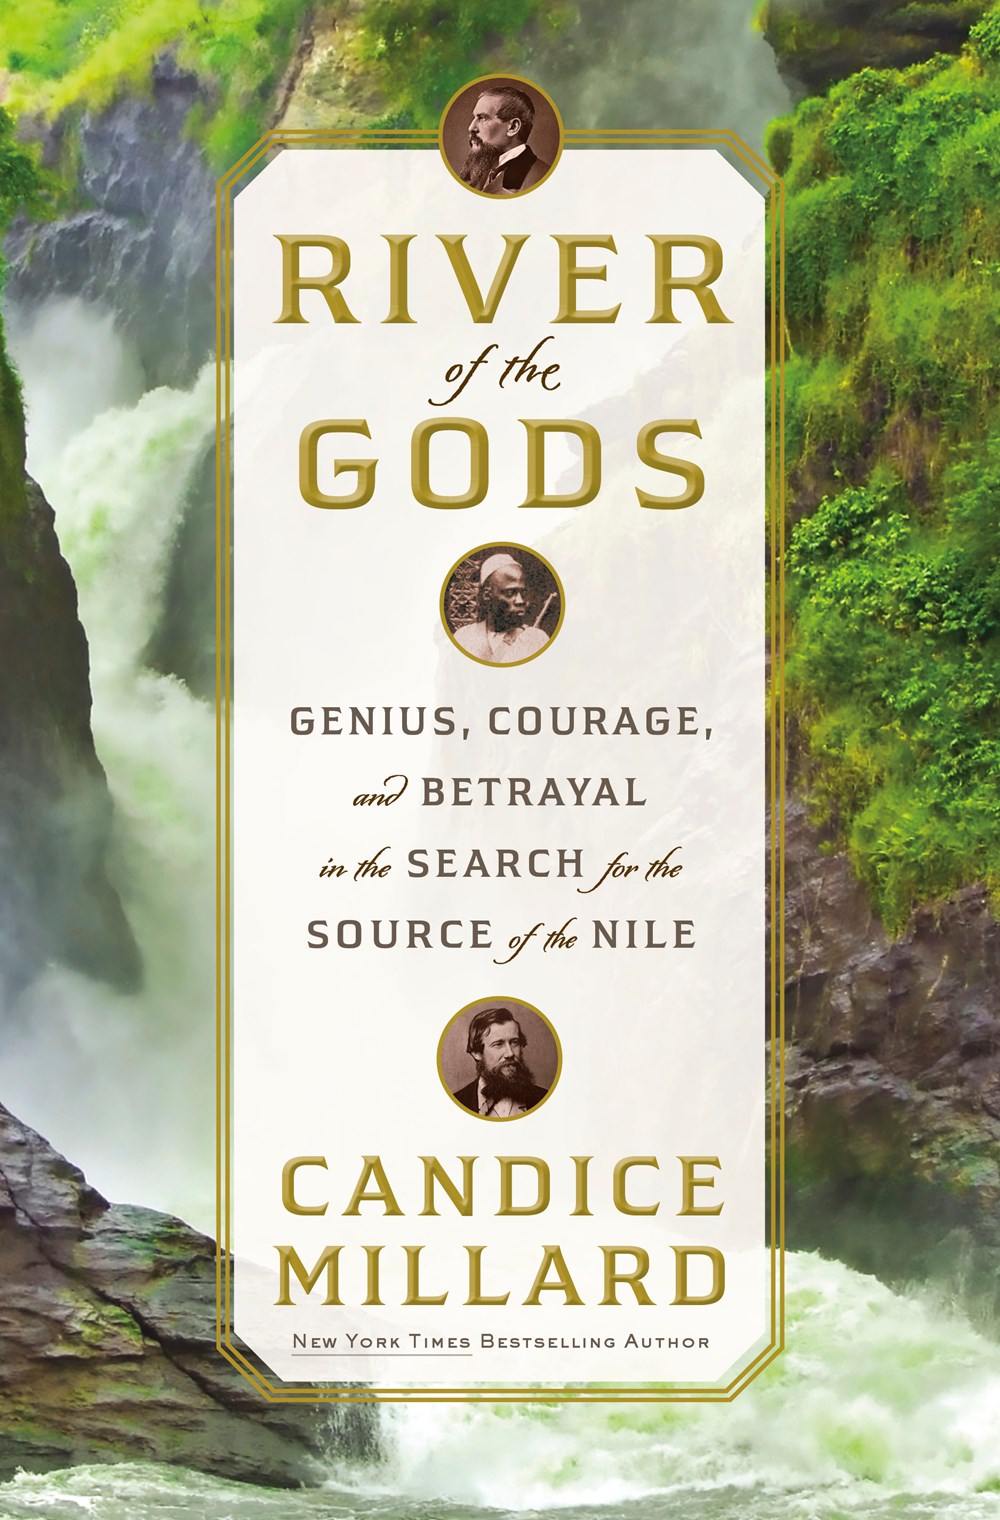 Image of "River of the Gods: Genius, Courage, and Betrayal in the Search for the Source of the Nile"